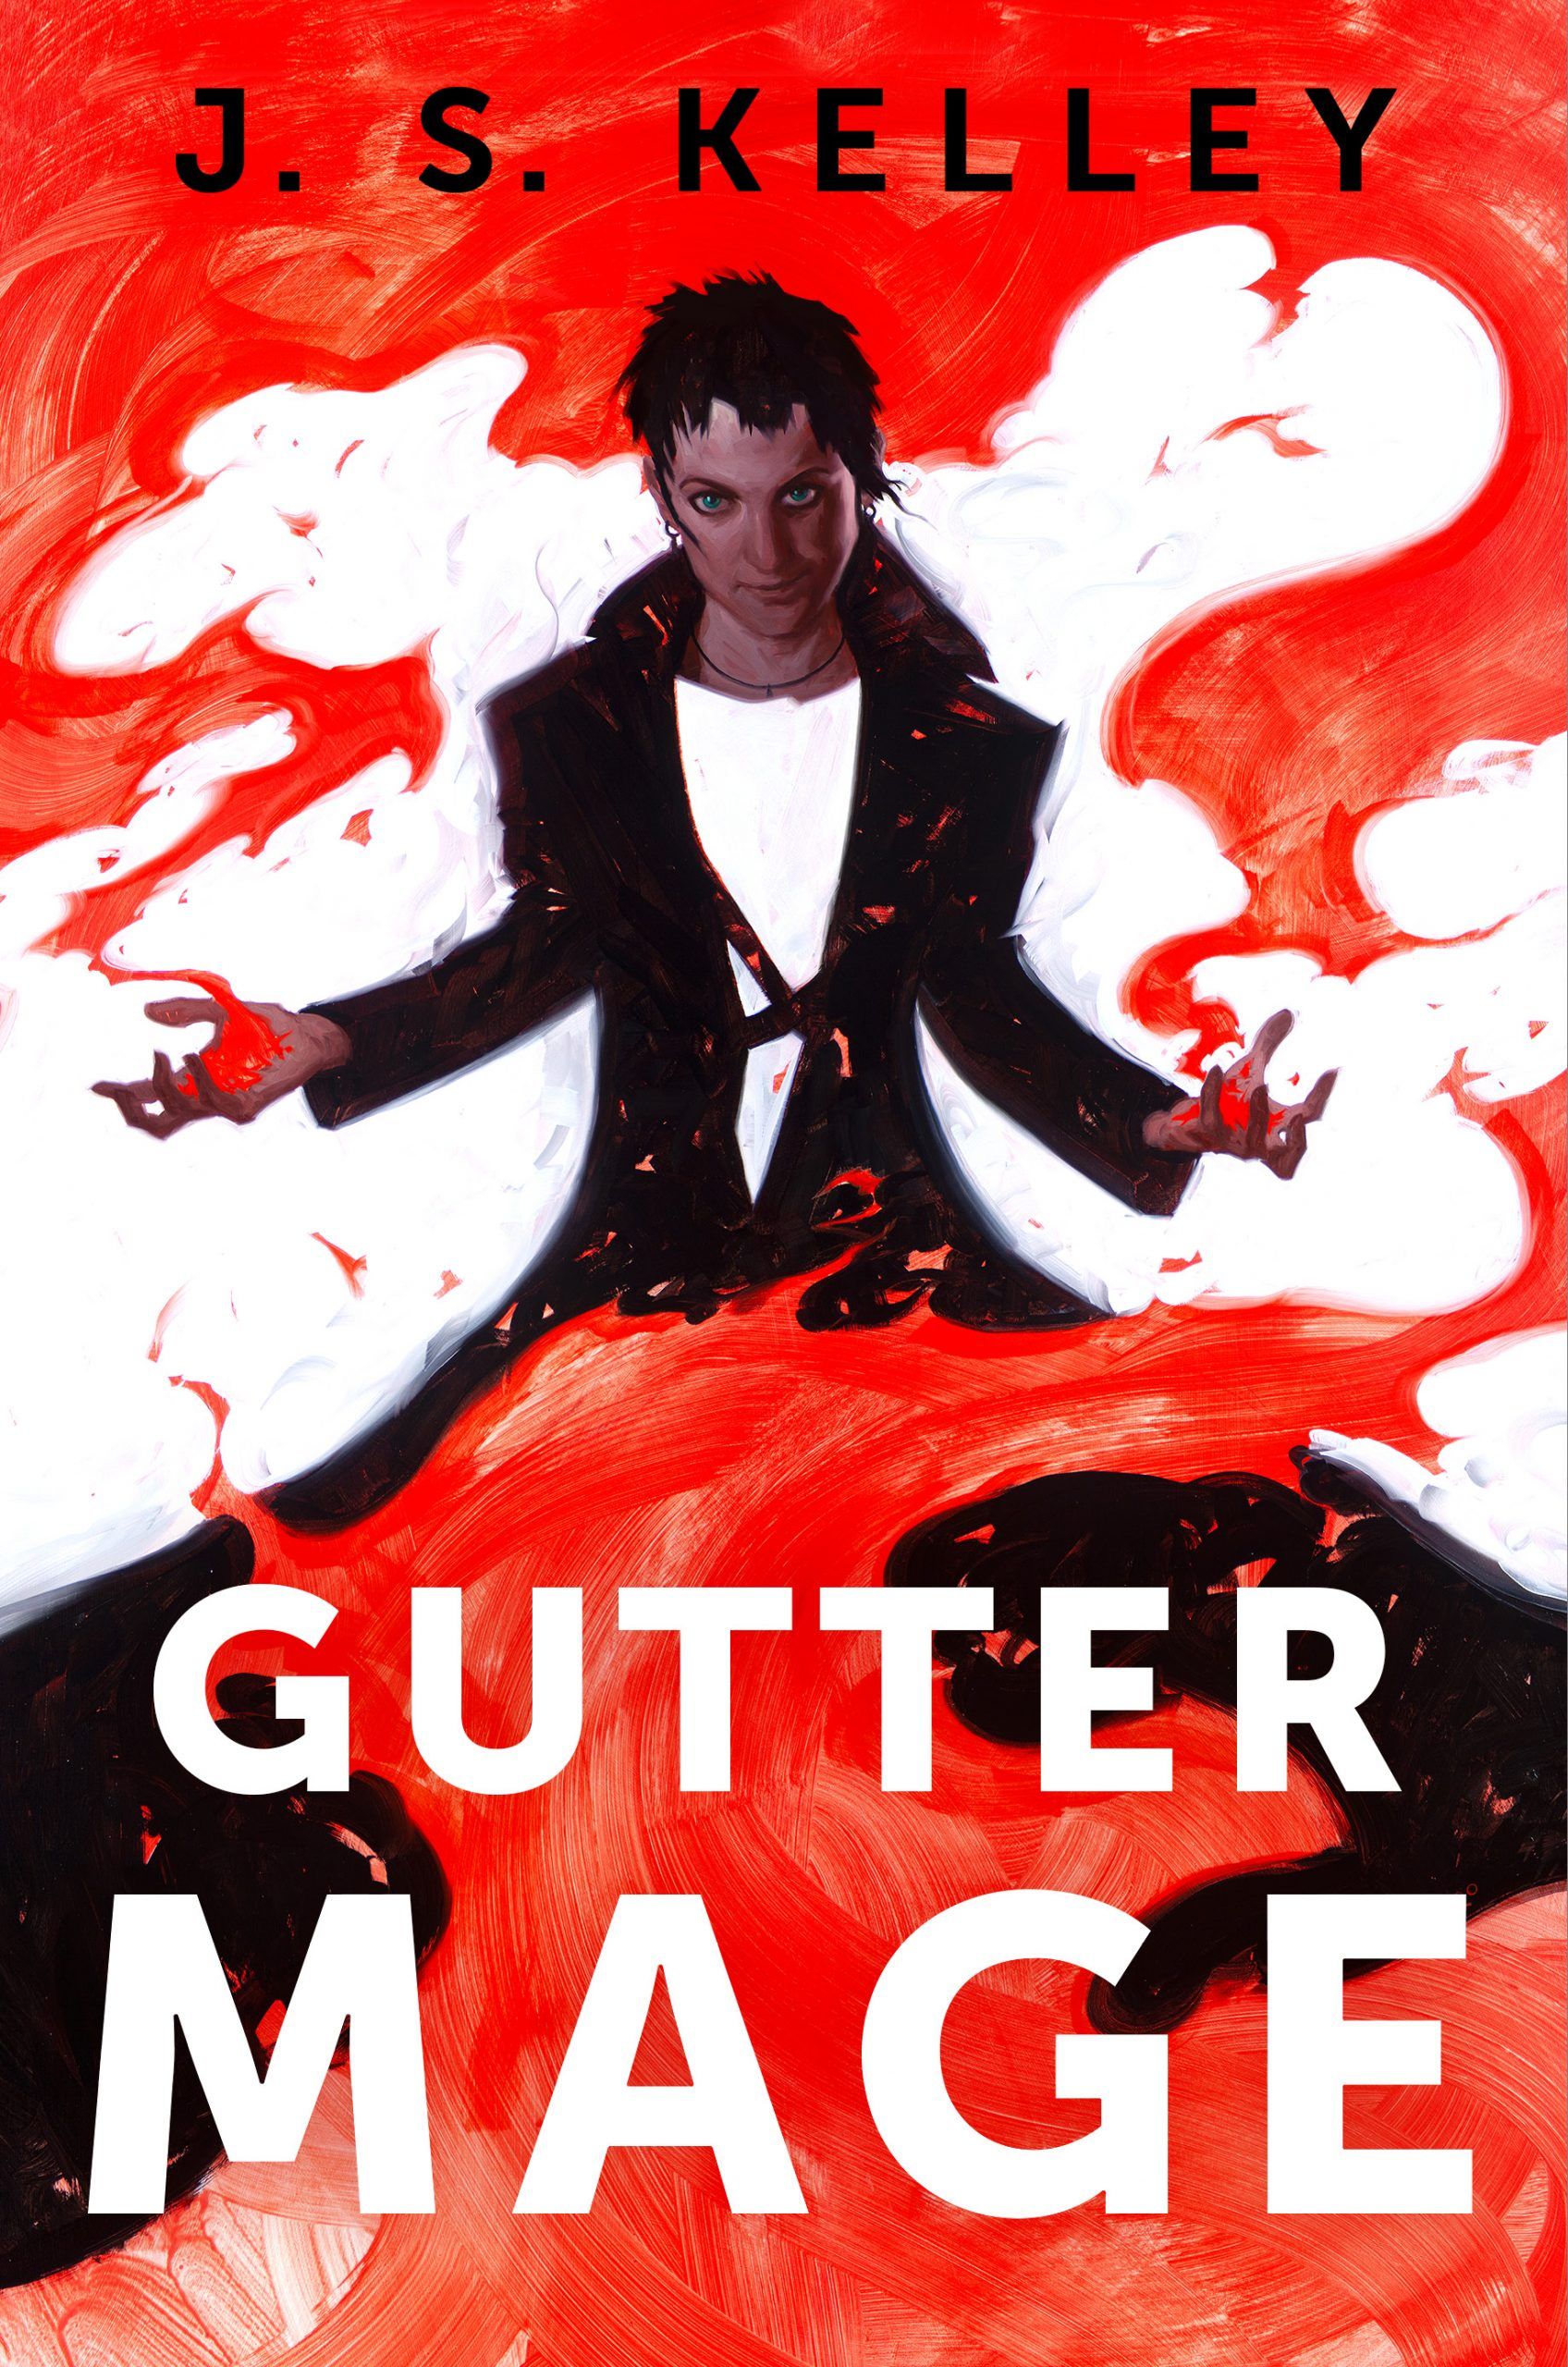 Gutter Mage, coming Sept 21st